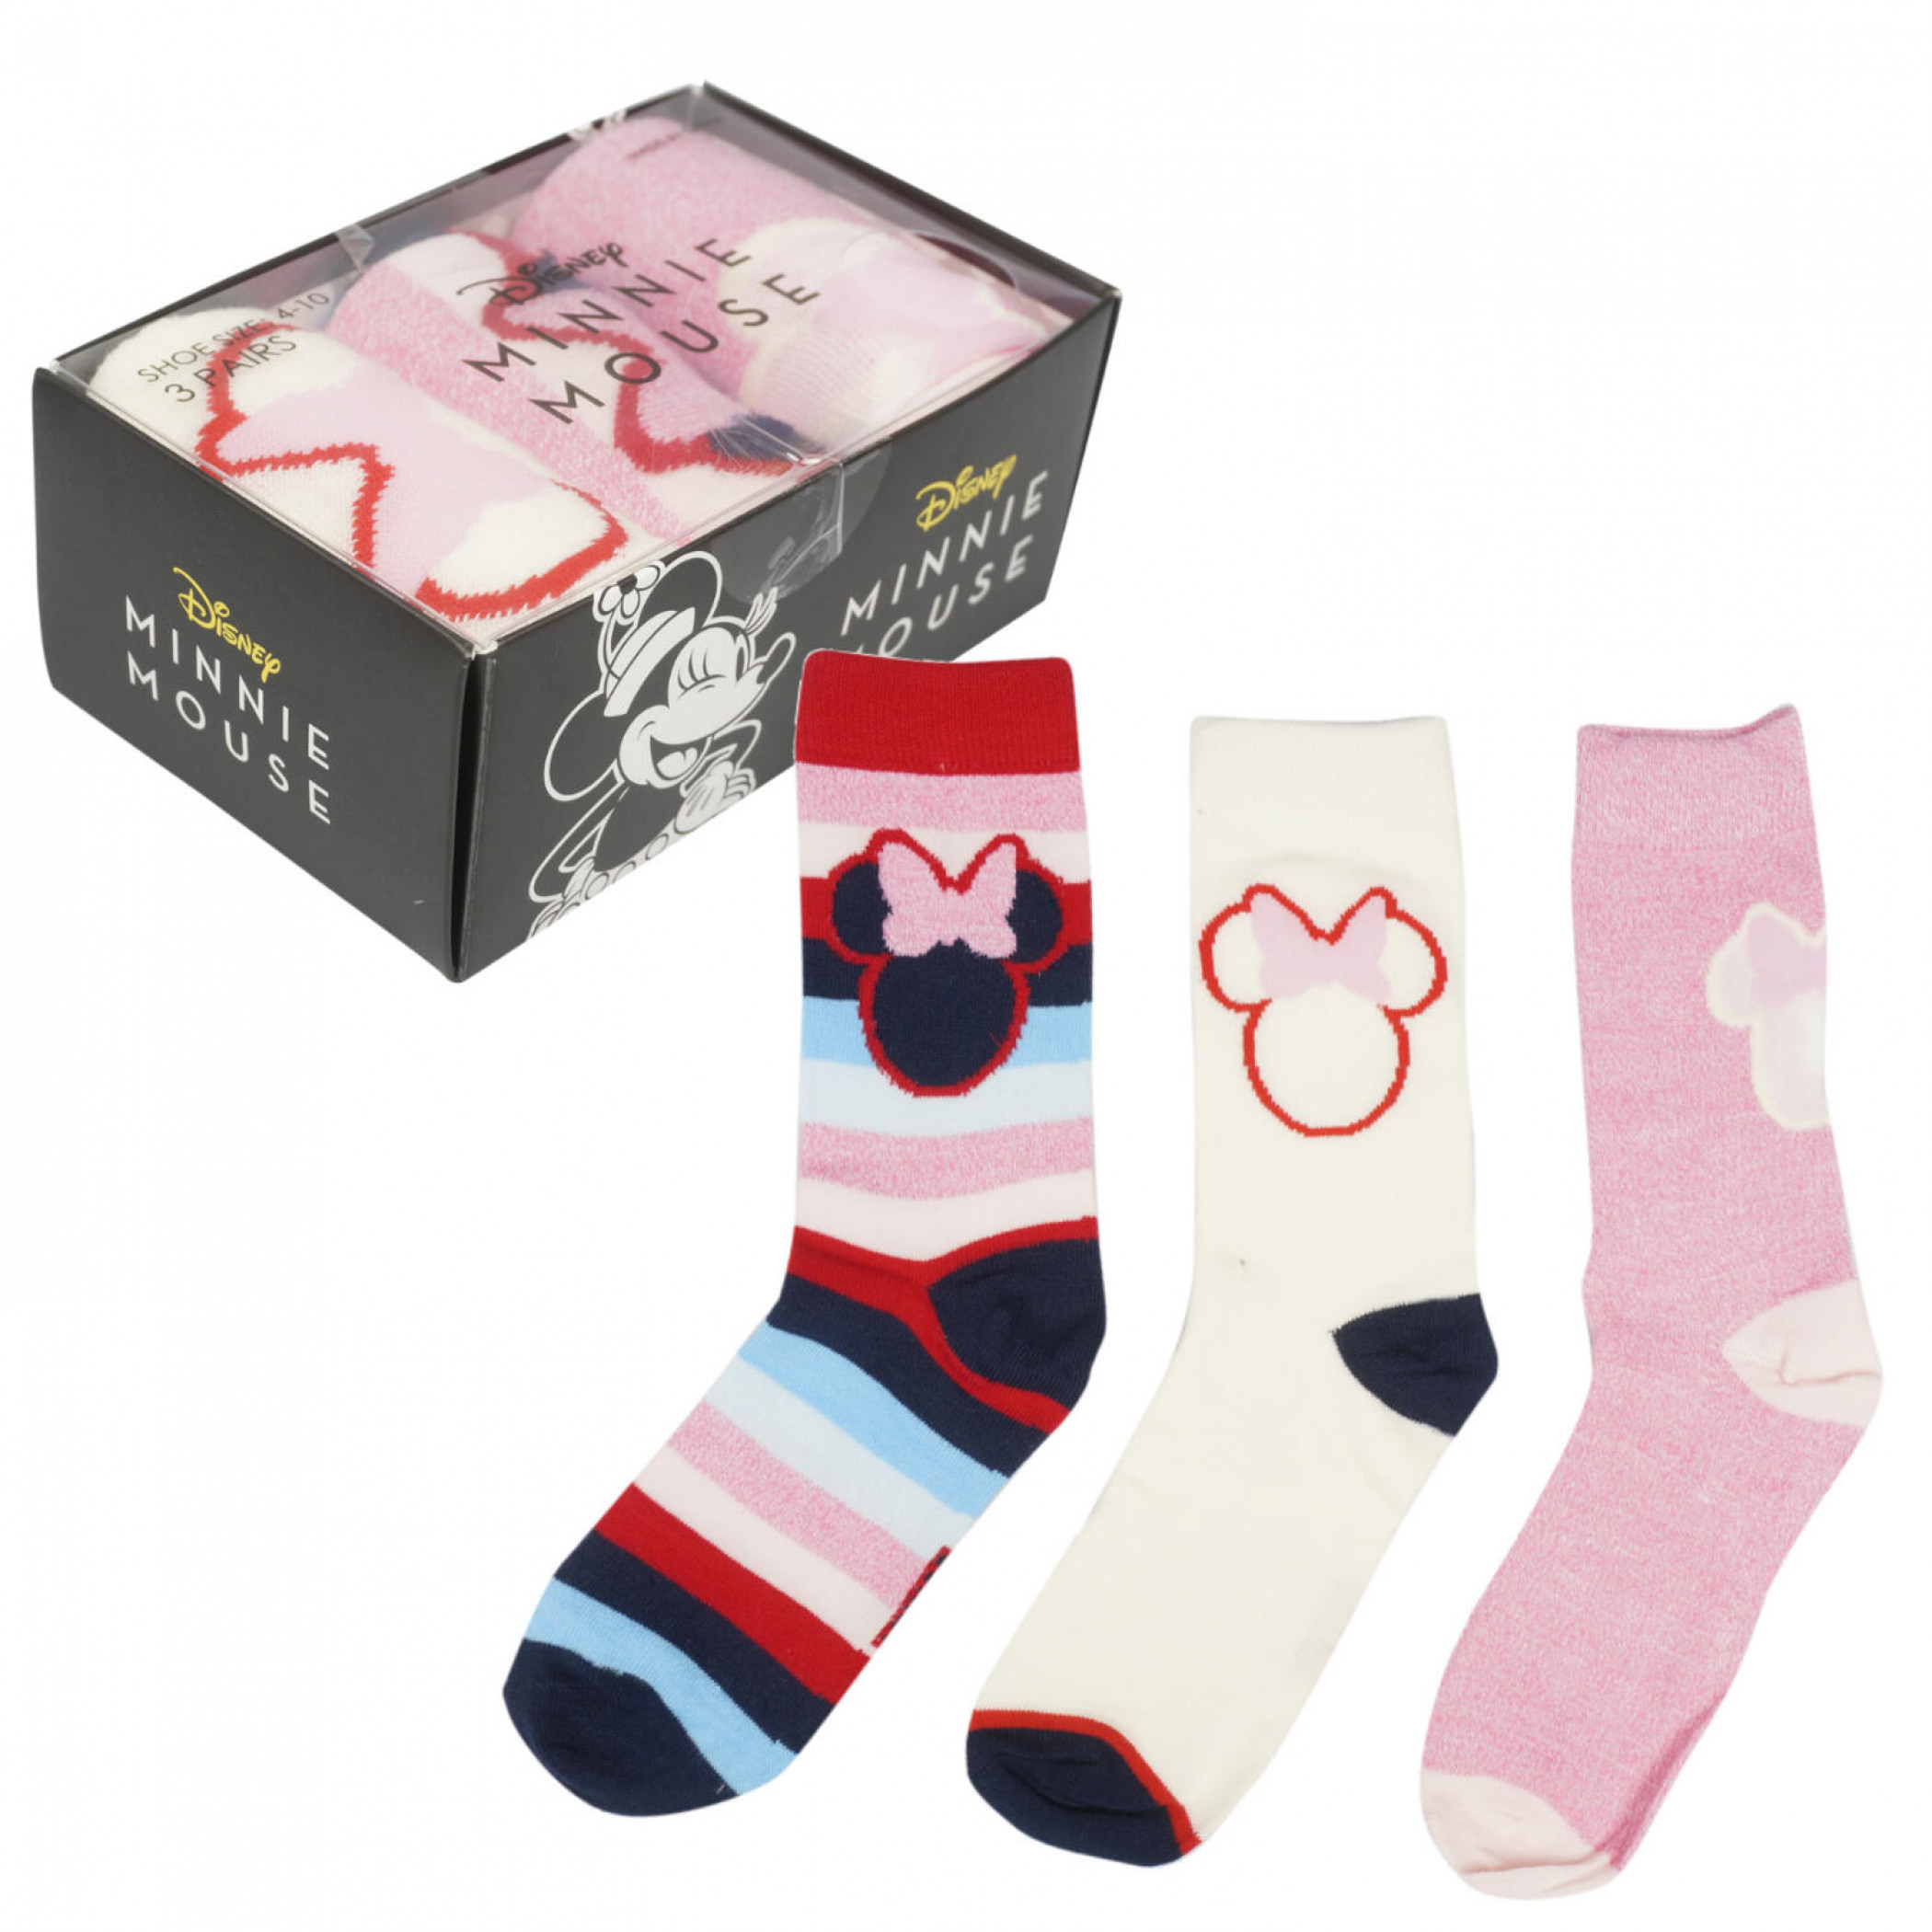 Minnie Mouse 3-Pack Women's Socks